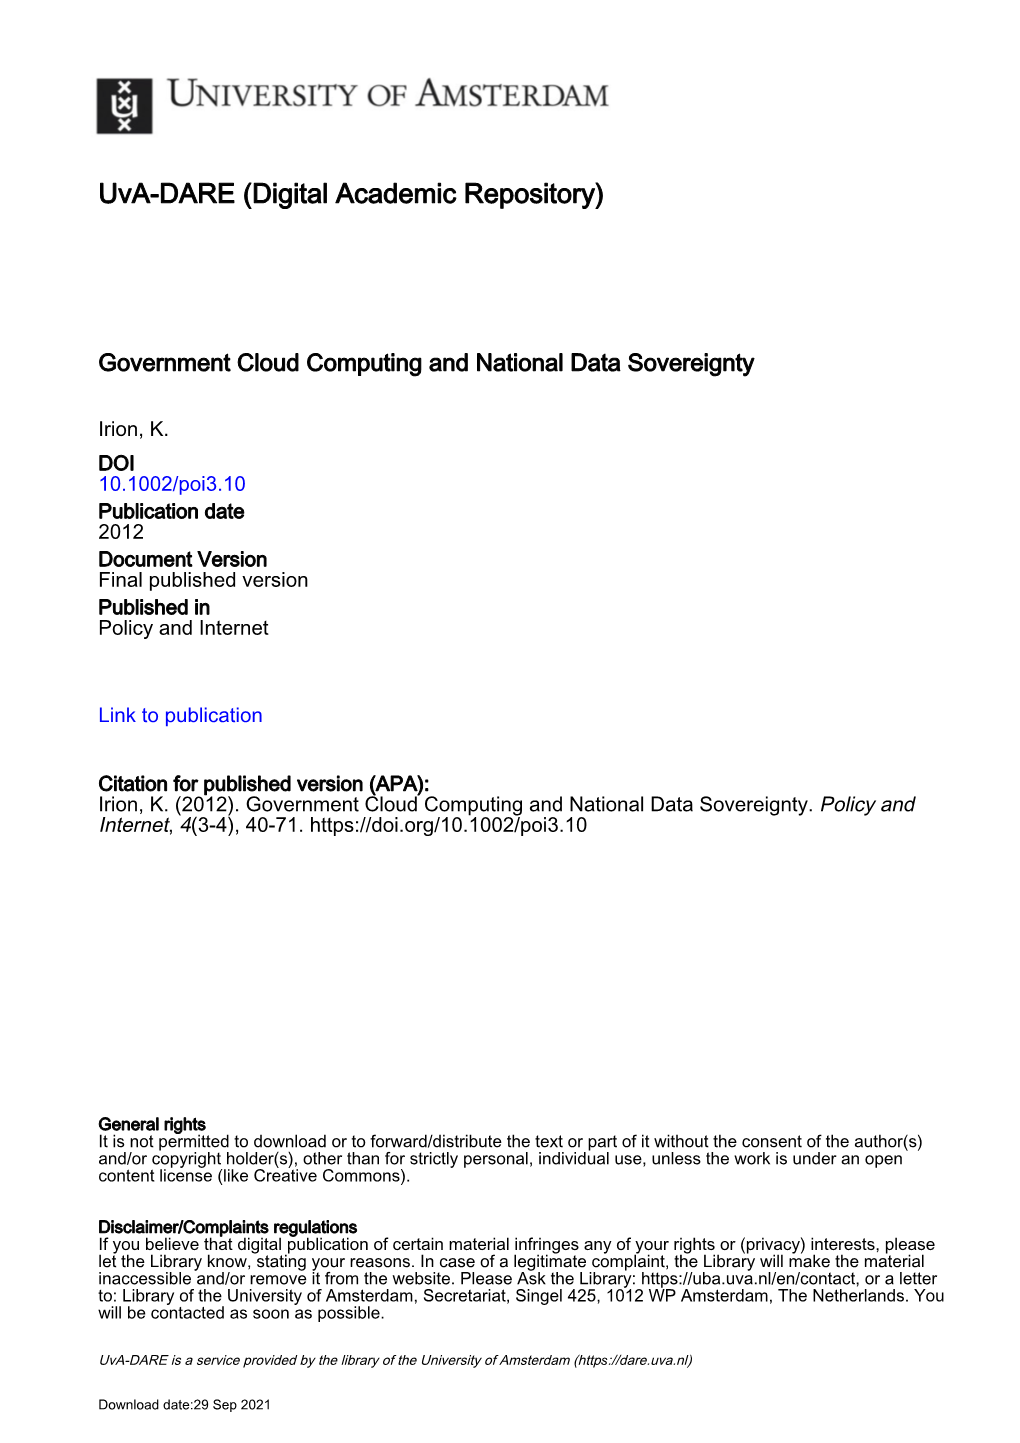 Government Cloud Computing and National Data Sovereignty